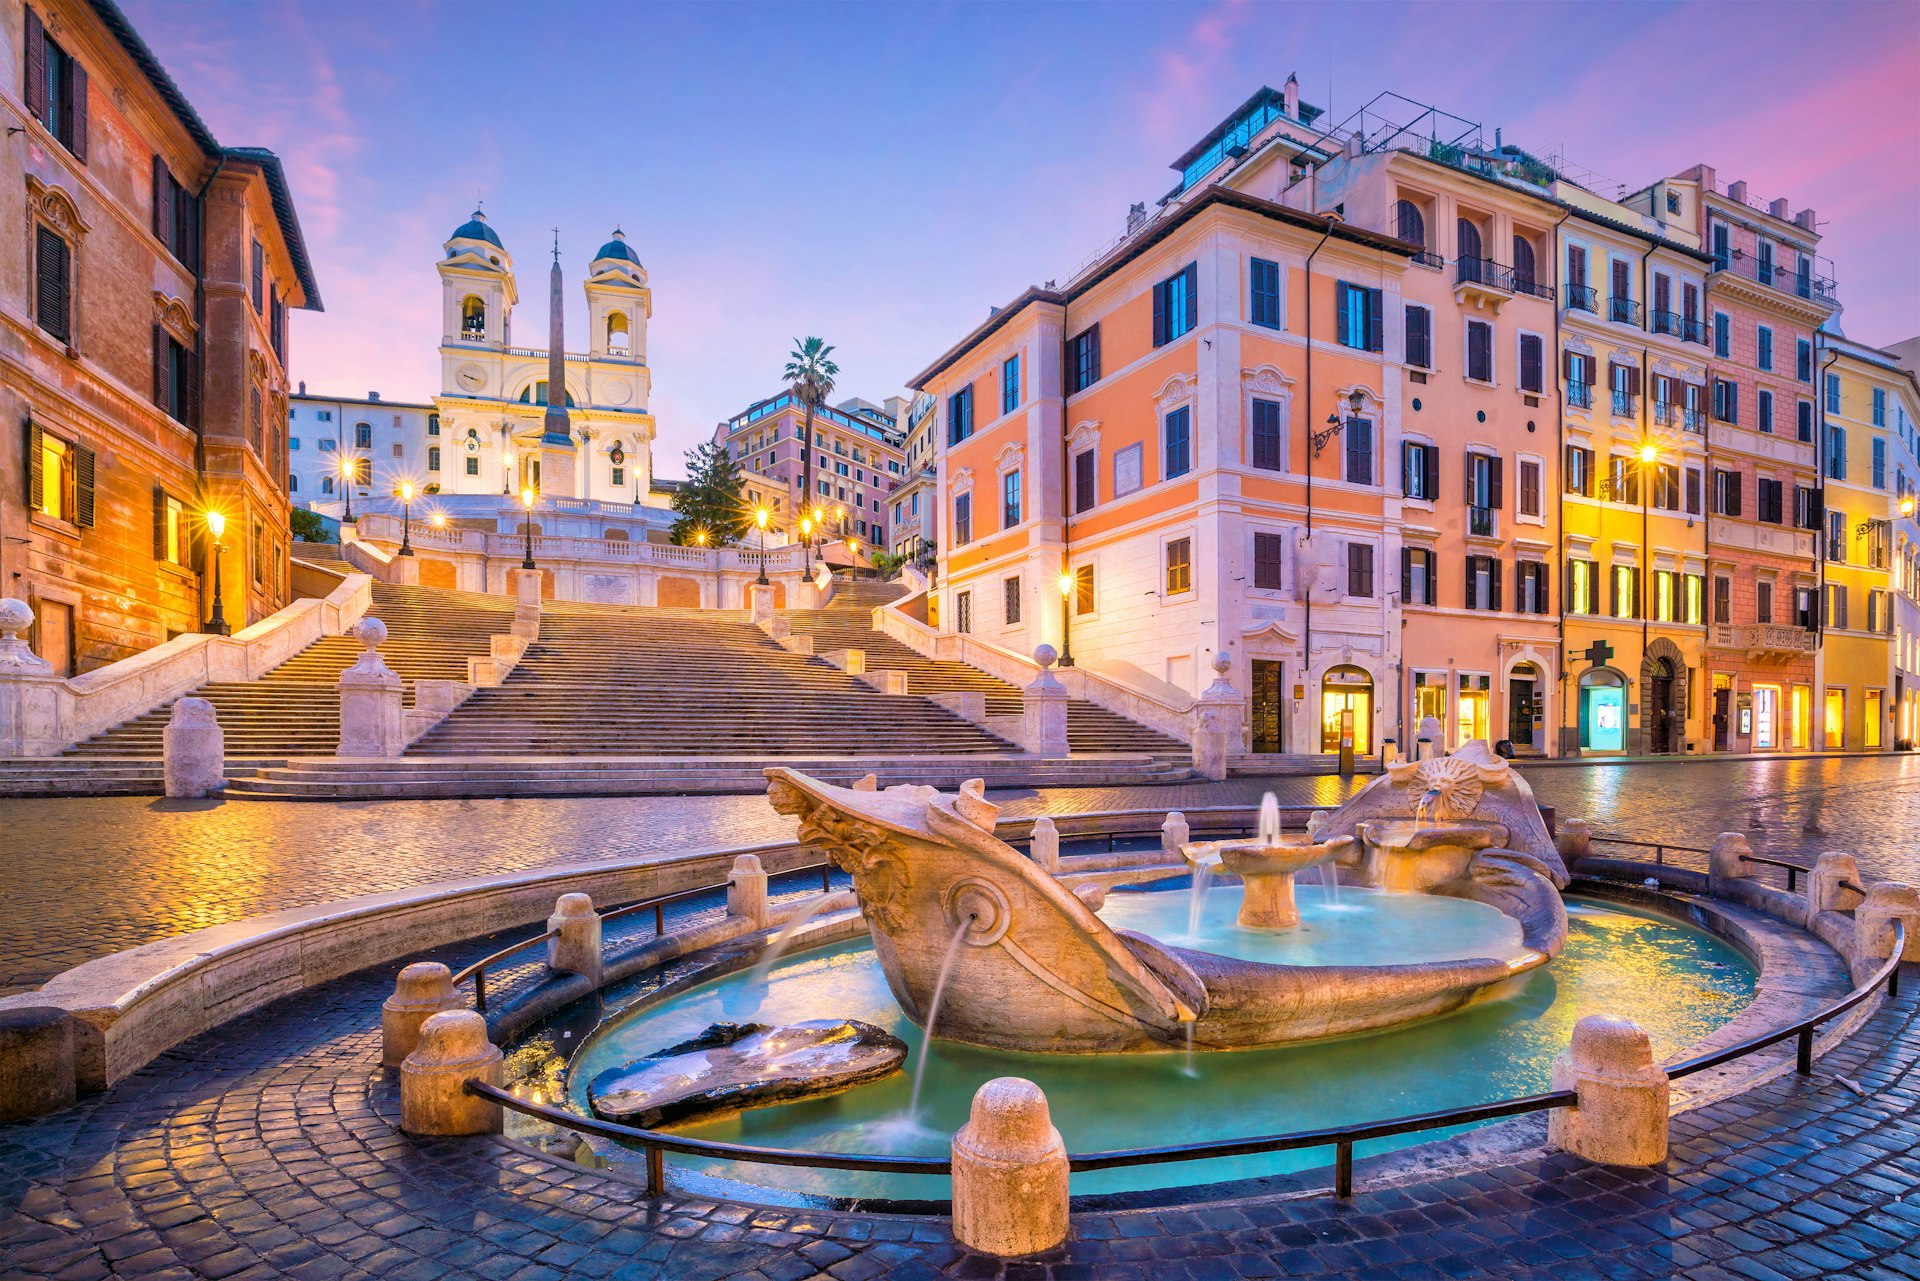 A series of steps lead down to a Roman plaza with cobbled stone streets and in the center of the photo is a marble foundation in the shape of a boat. 